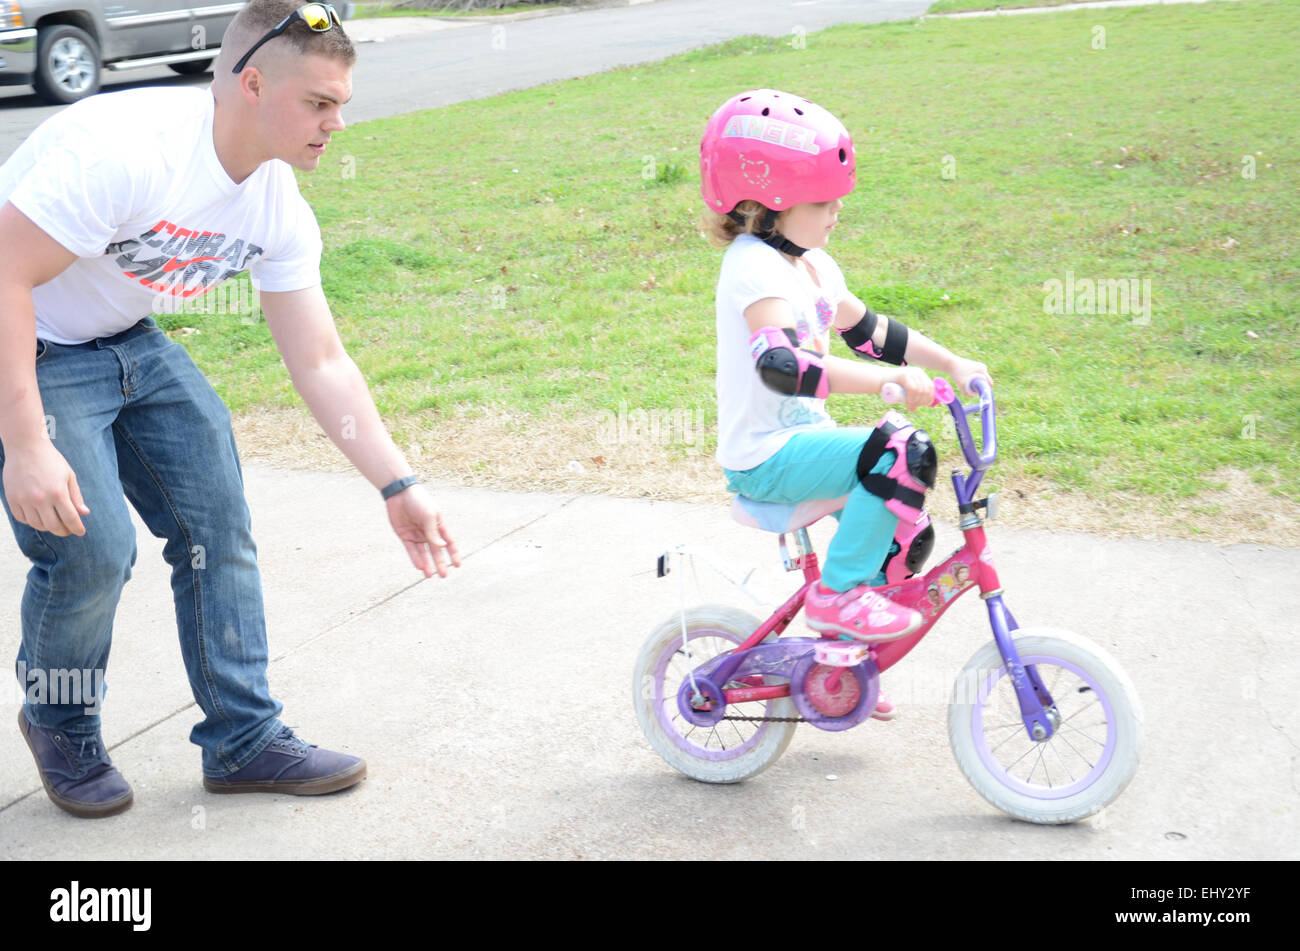 Father teaching daughter to ride a bike. Stock Photo